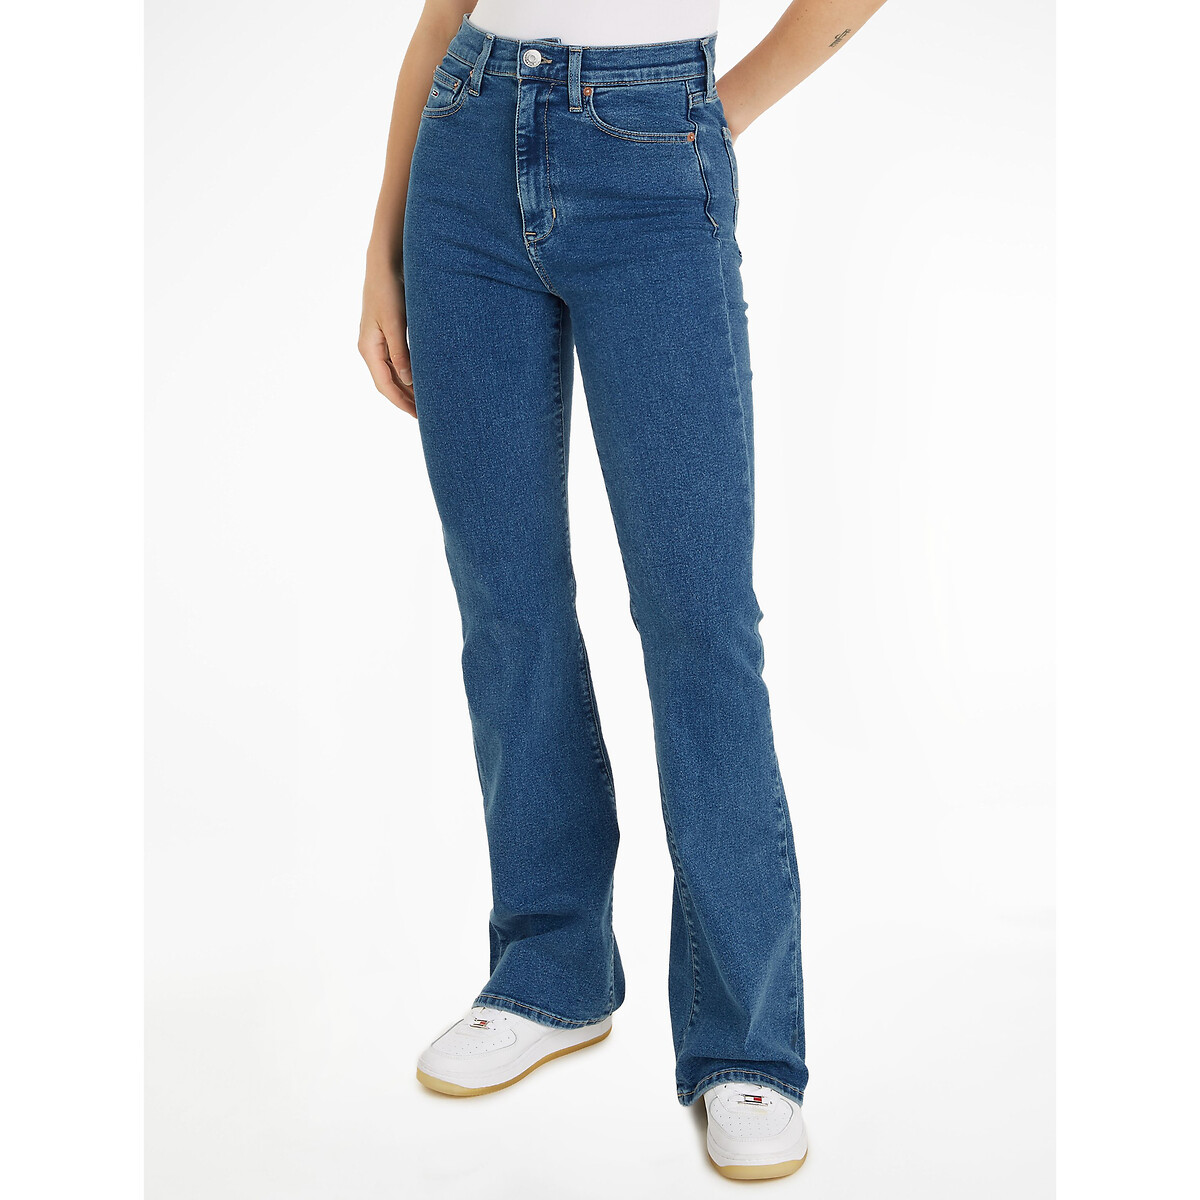 TOMMY JEANS Flare jeans, hoge taille